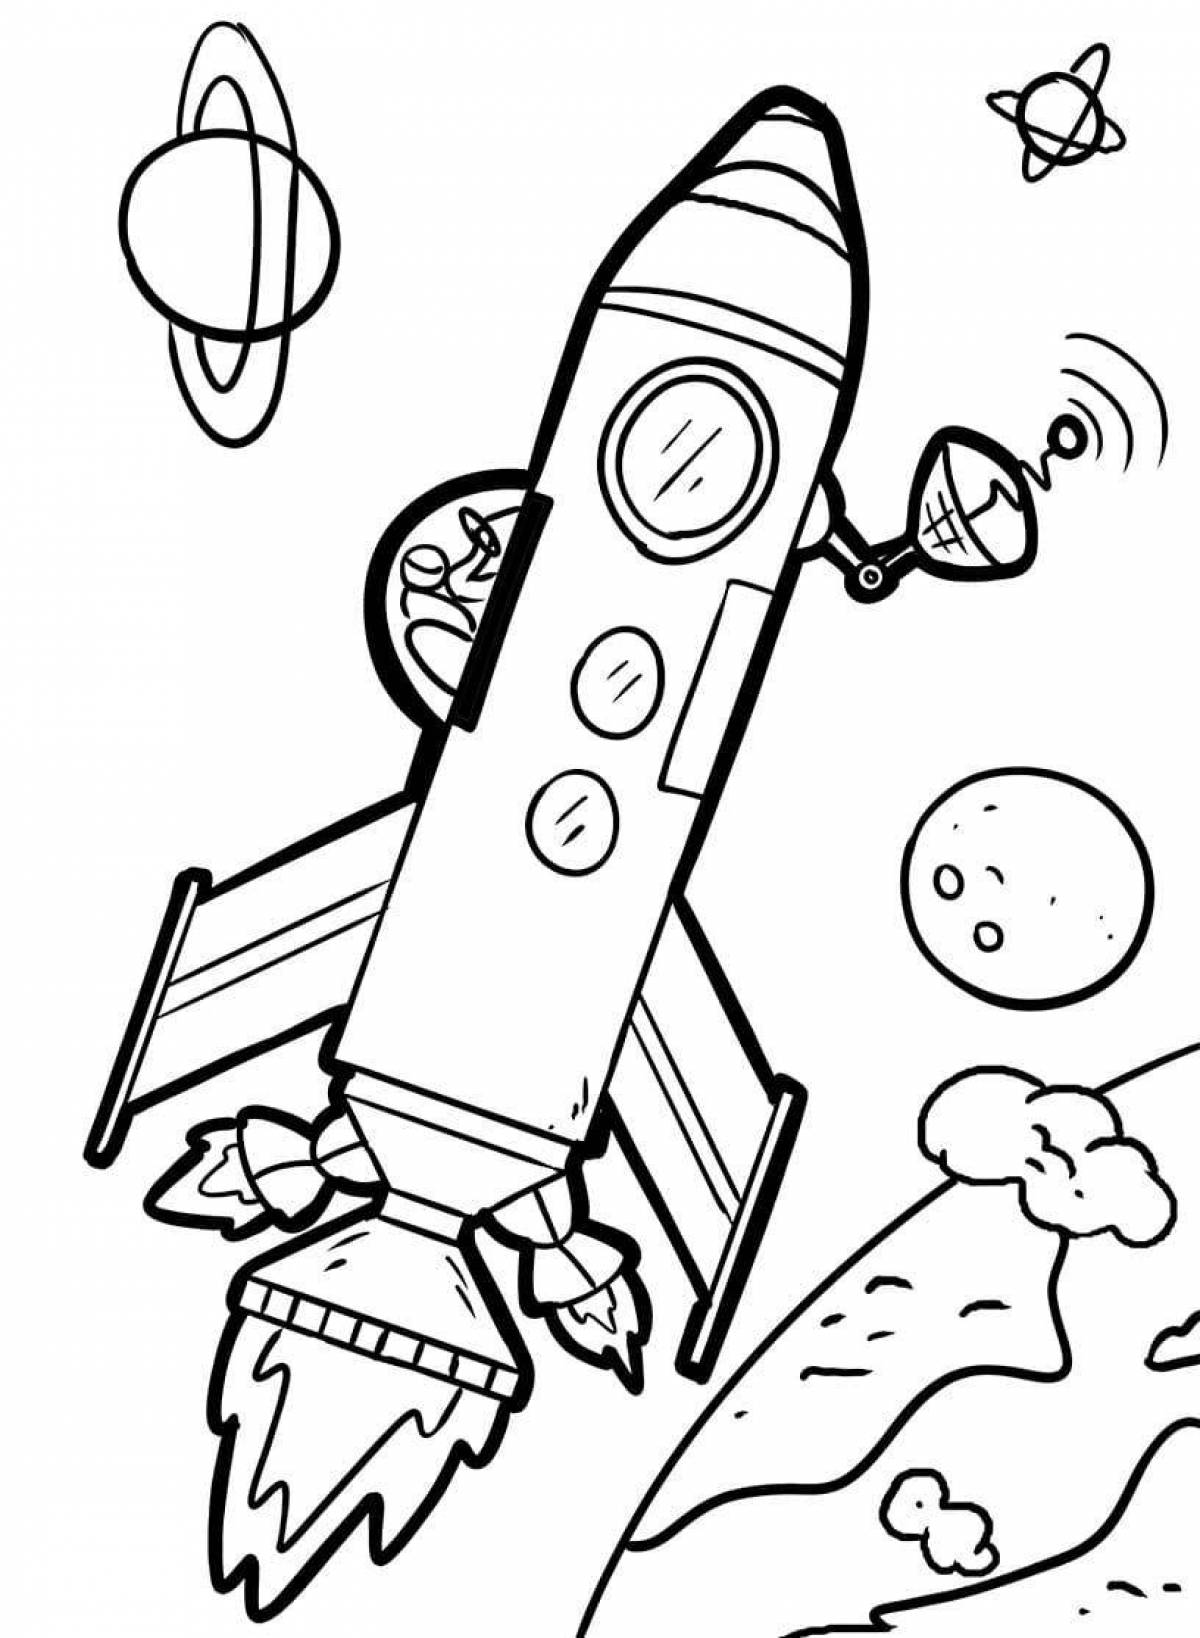 Fantastic rocket coloring book for 6-7 year olds